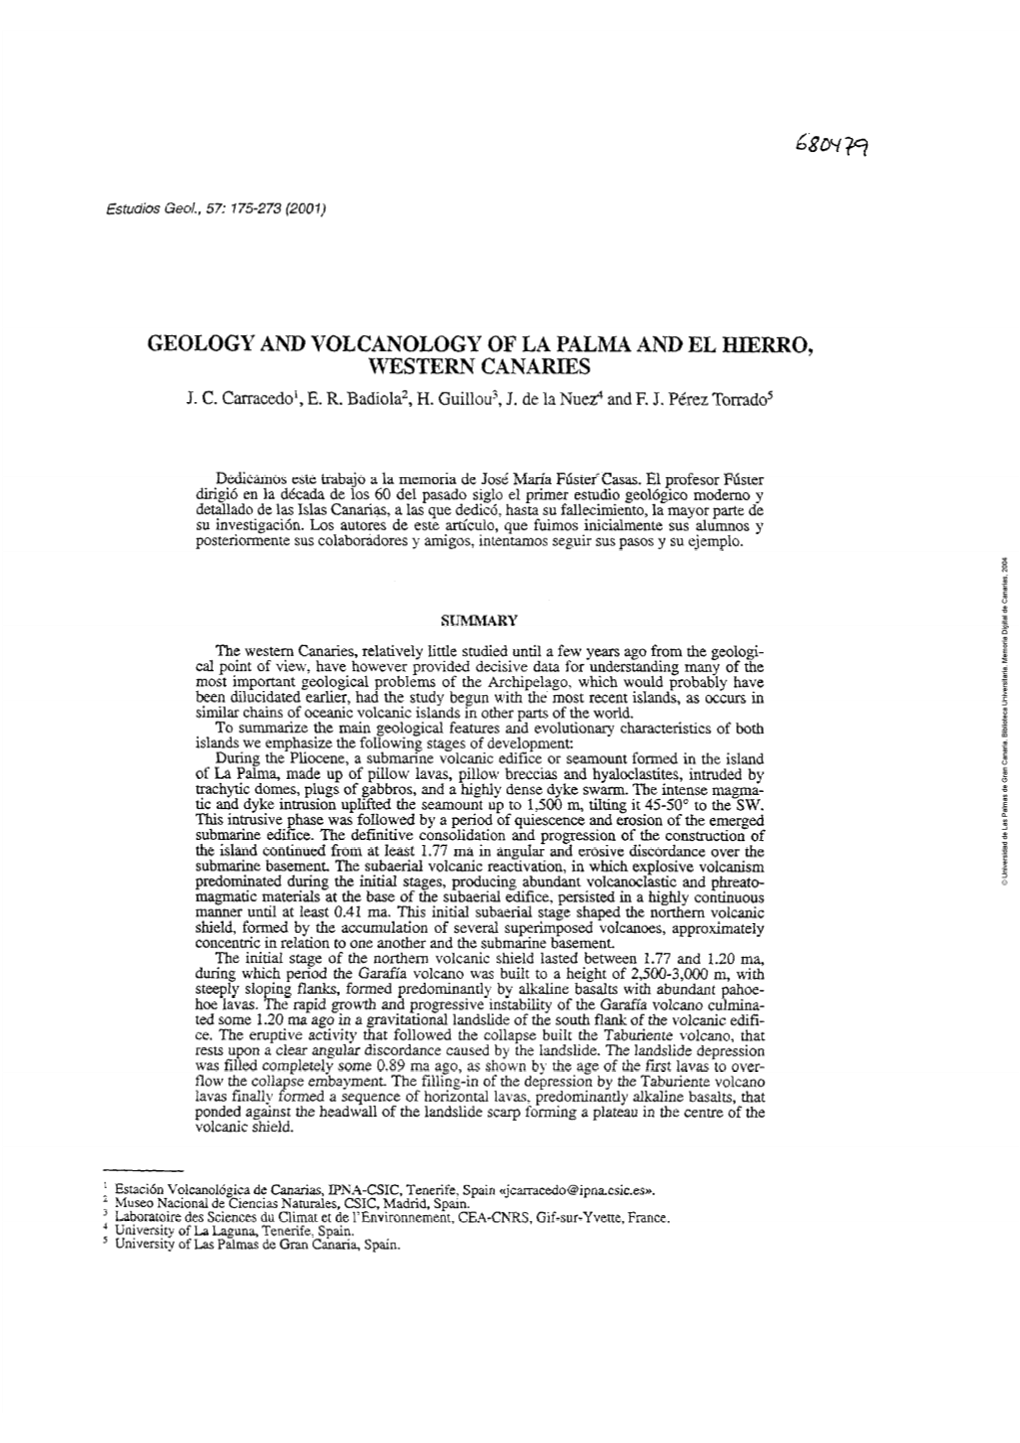 Geology and Volcanology of La Palma and El Hierro, Western Canaries 213